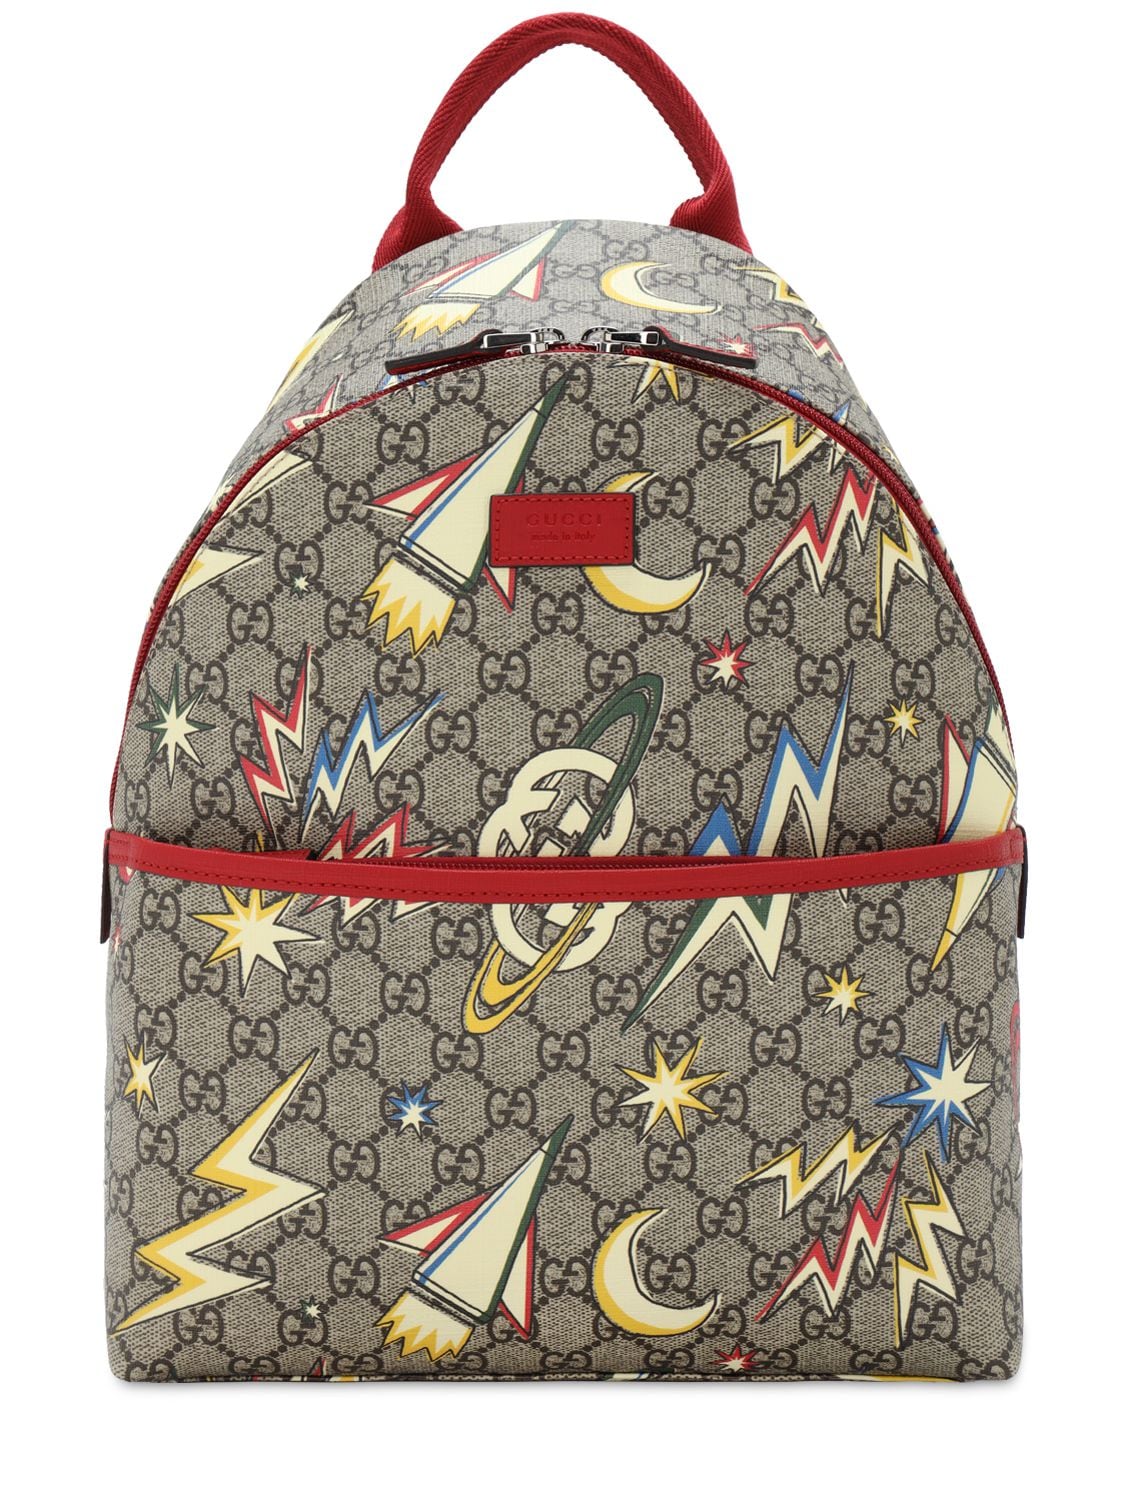 Gg Supreme Space Printed Canvas Backpack